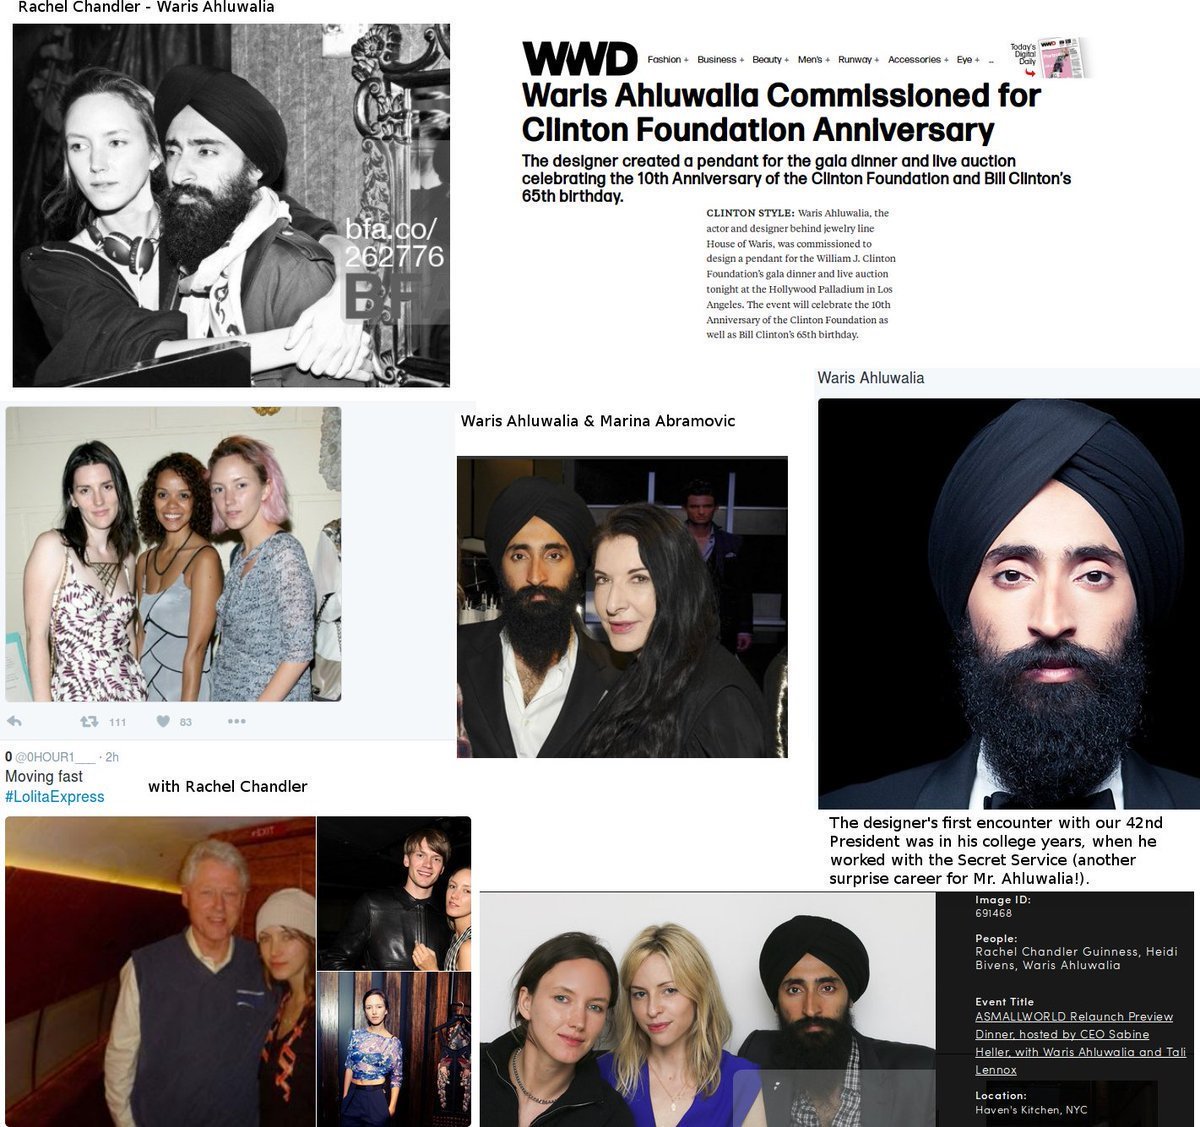 Ray Chandler pictured with Waris Ahluwalia; a designer and former secret service member with contacts to the Clintons and Marina AbramovichAlso she is pictured with Bill on board the lolita express #QAnon  #WWG1WGA  #MEGA  #GreatAwakening  #DarkToLight  #Clinton  #RayChandler